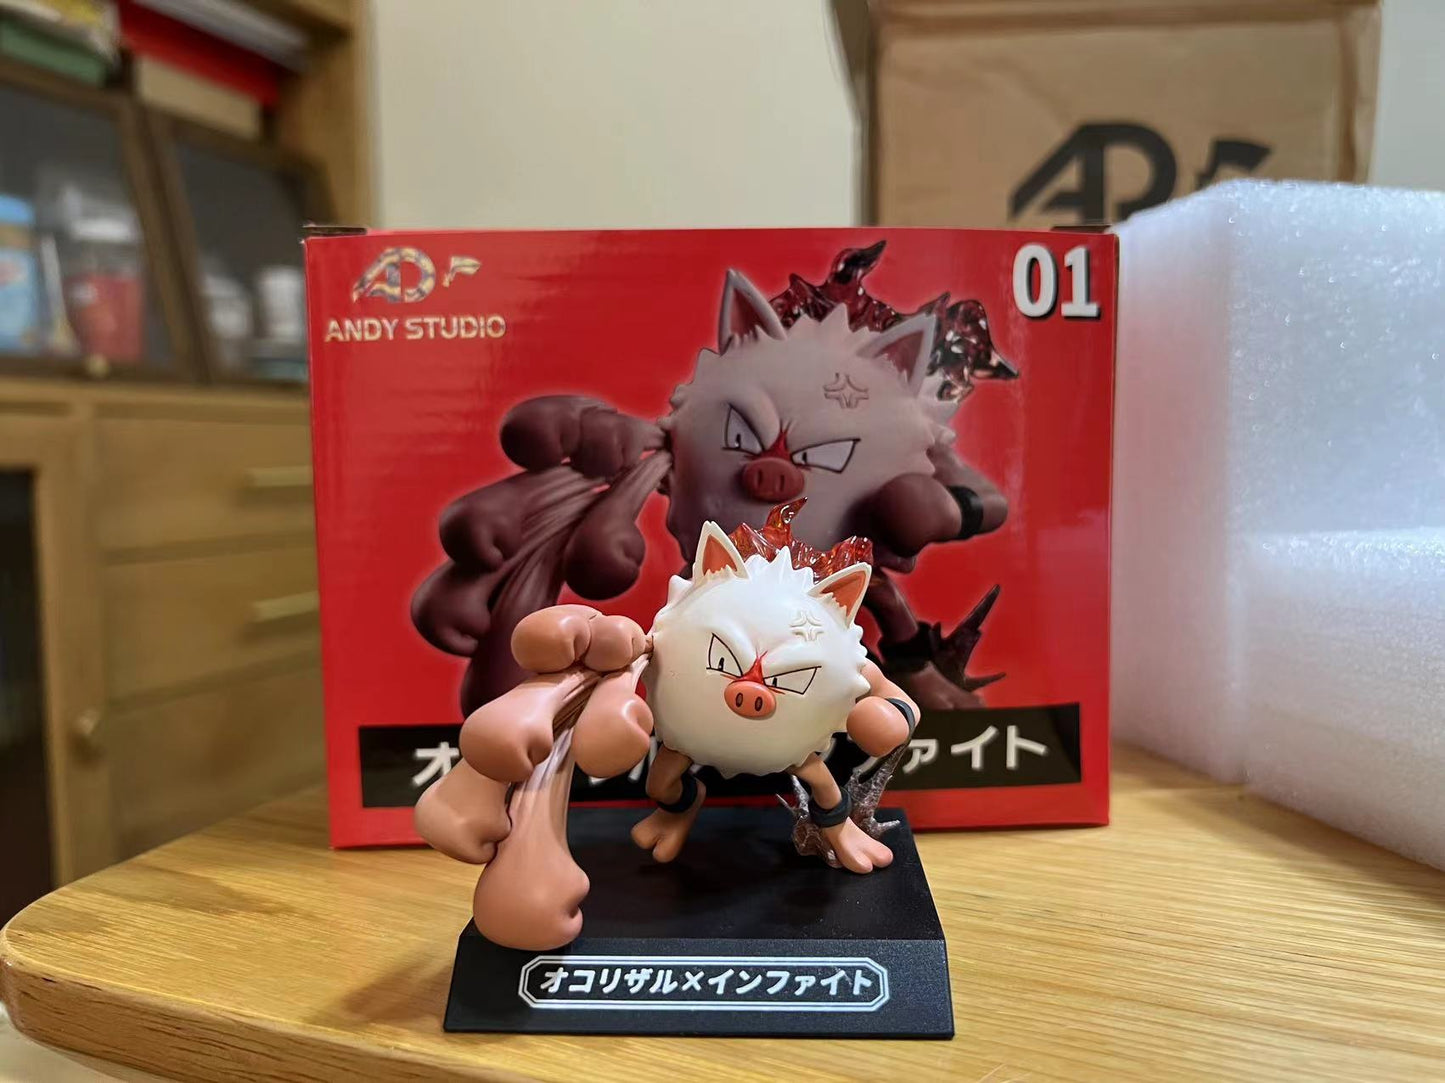 〖Sold Out〗Pokémon Peripheral Products Primeape - Andy Studio